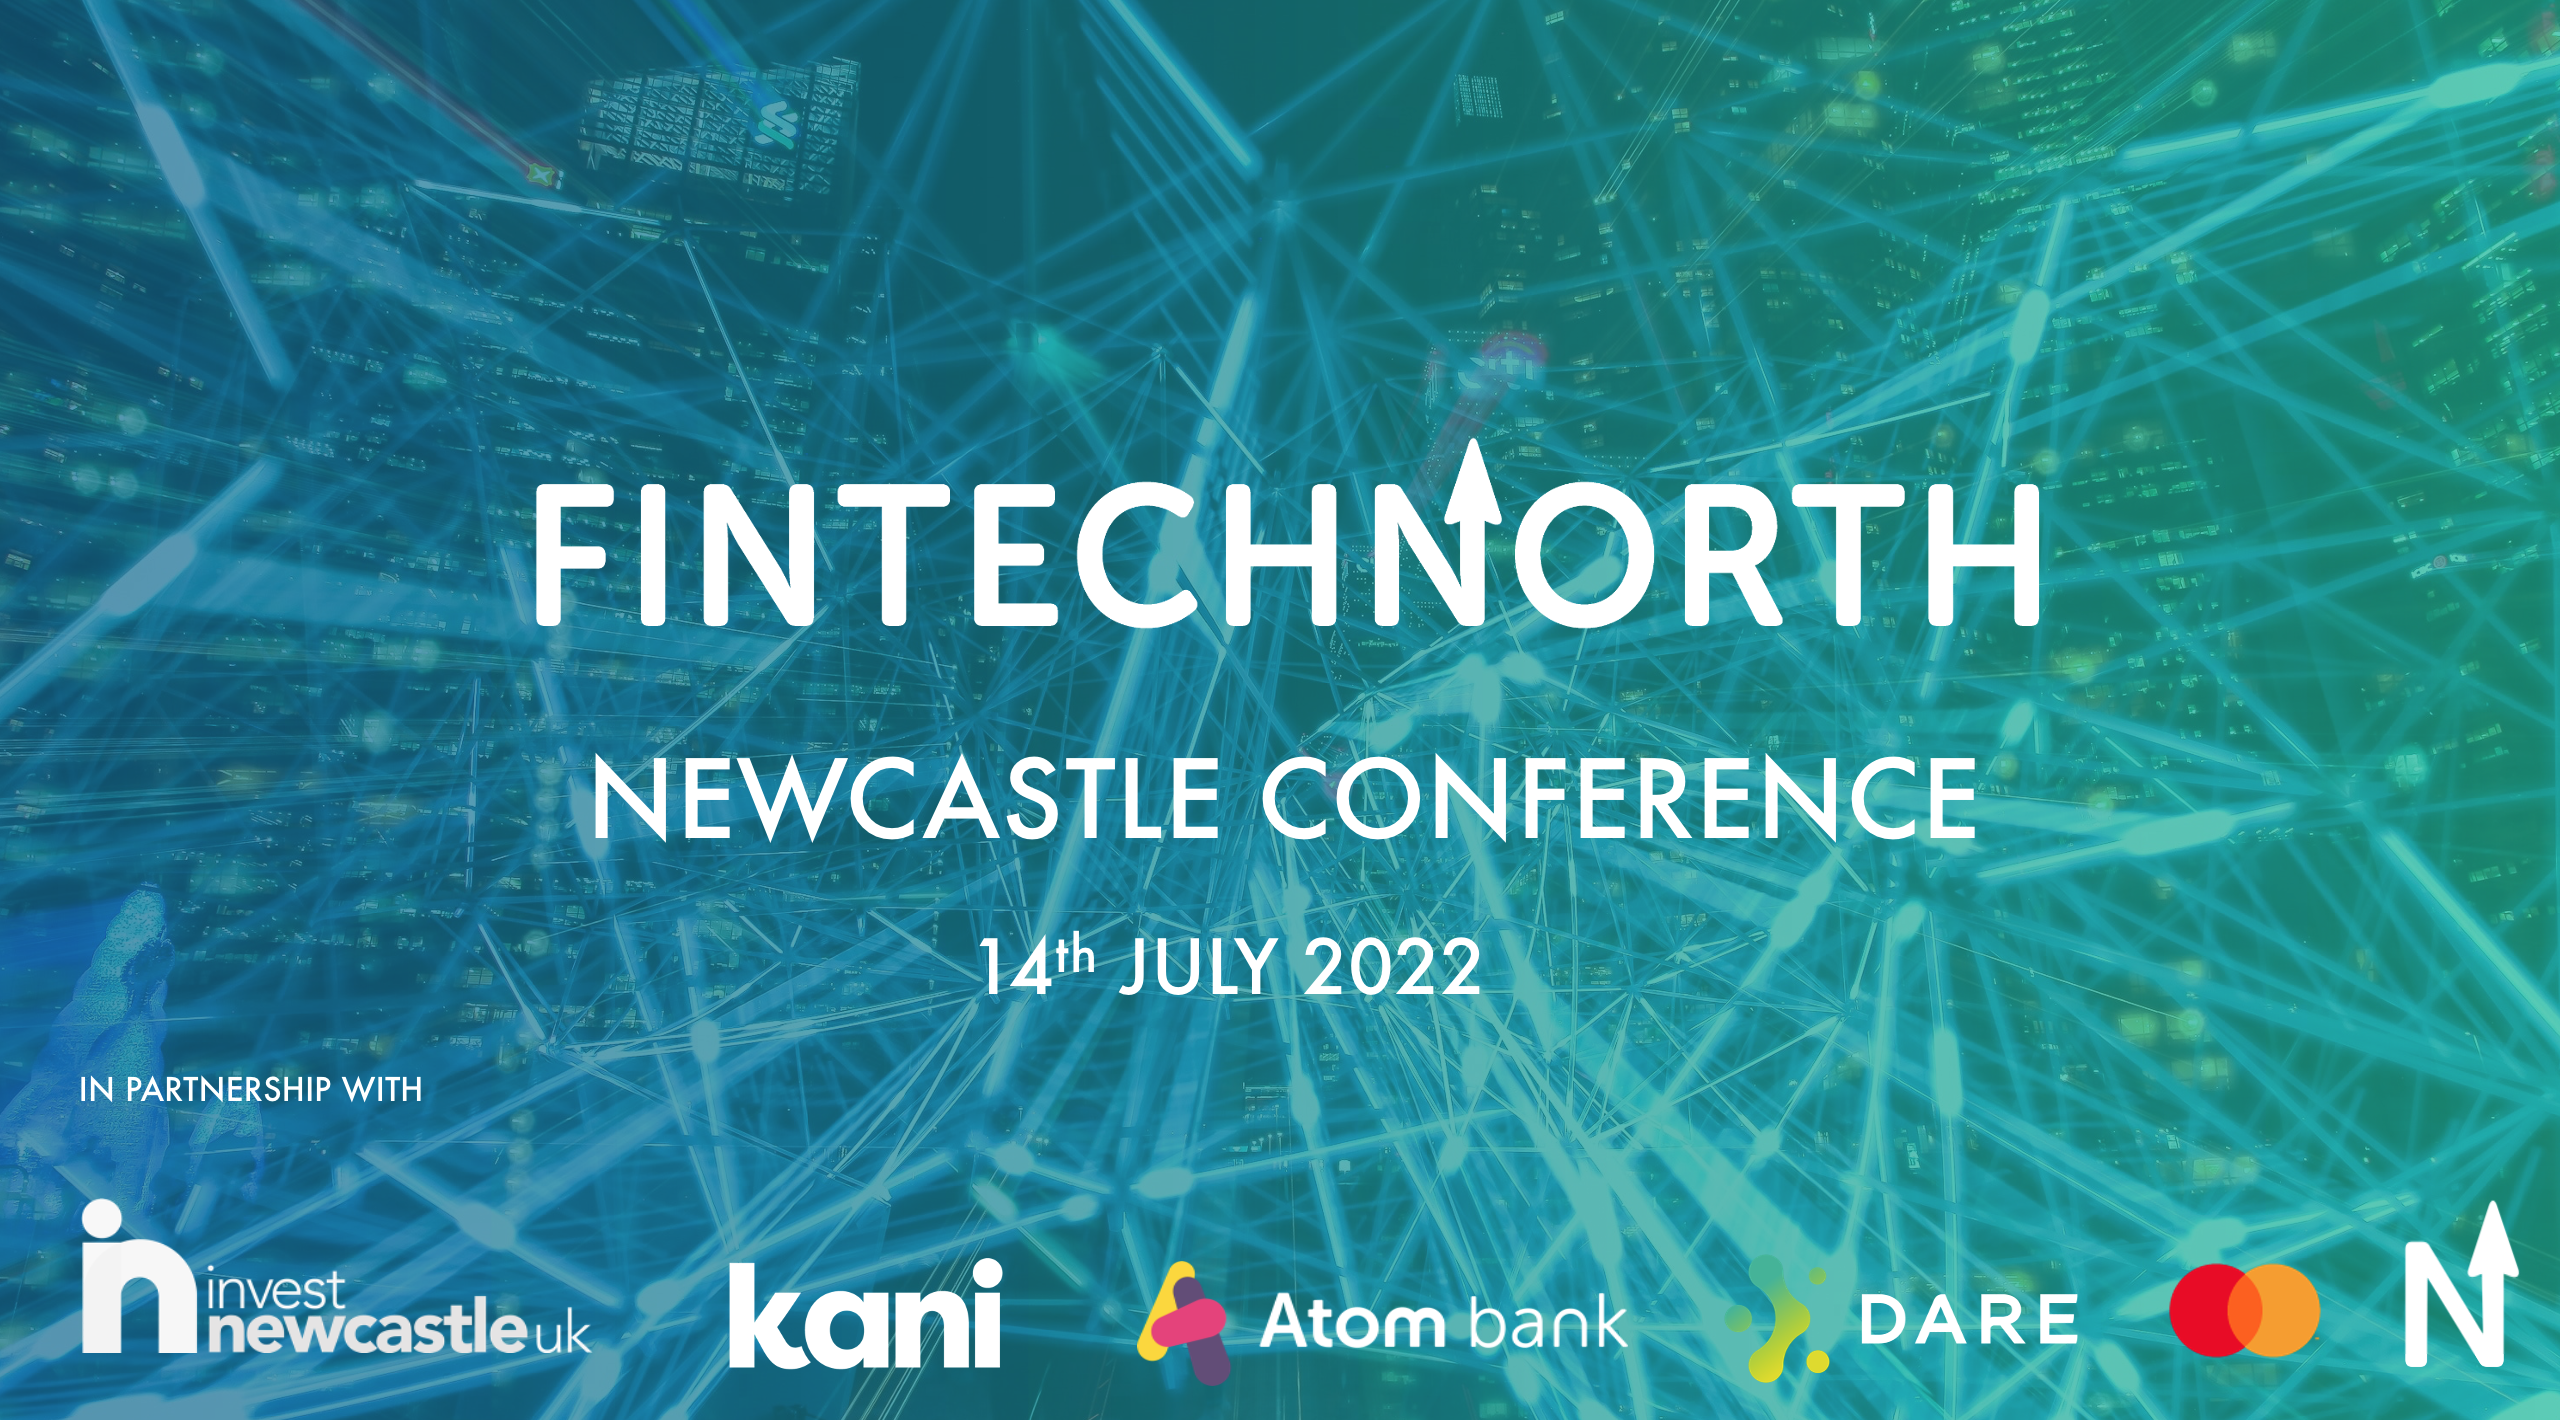 FinTech North Newcastle Conference: Re-cap and Re-watch